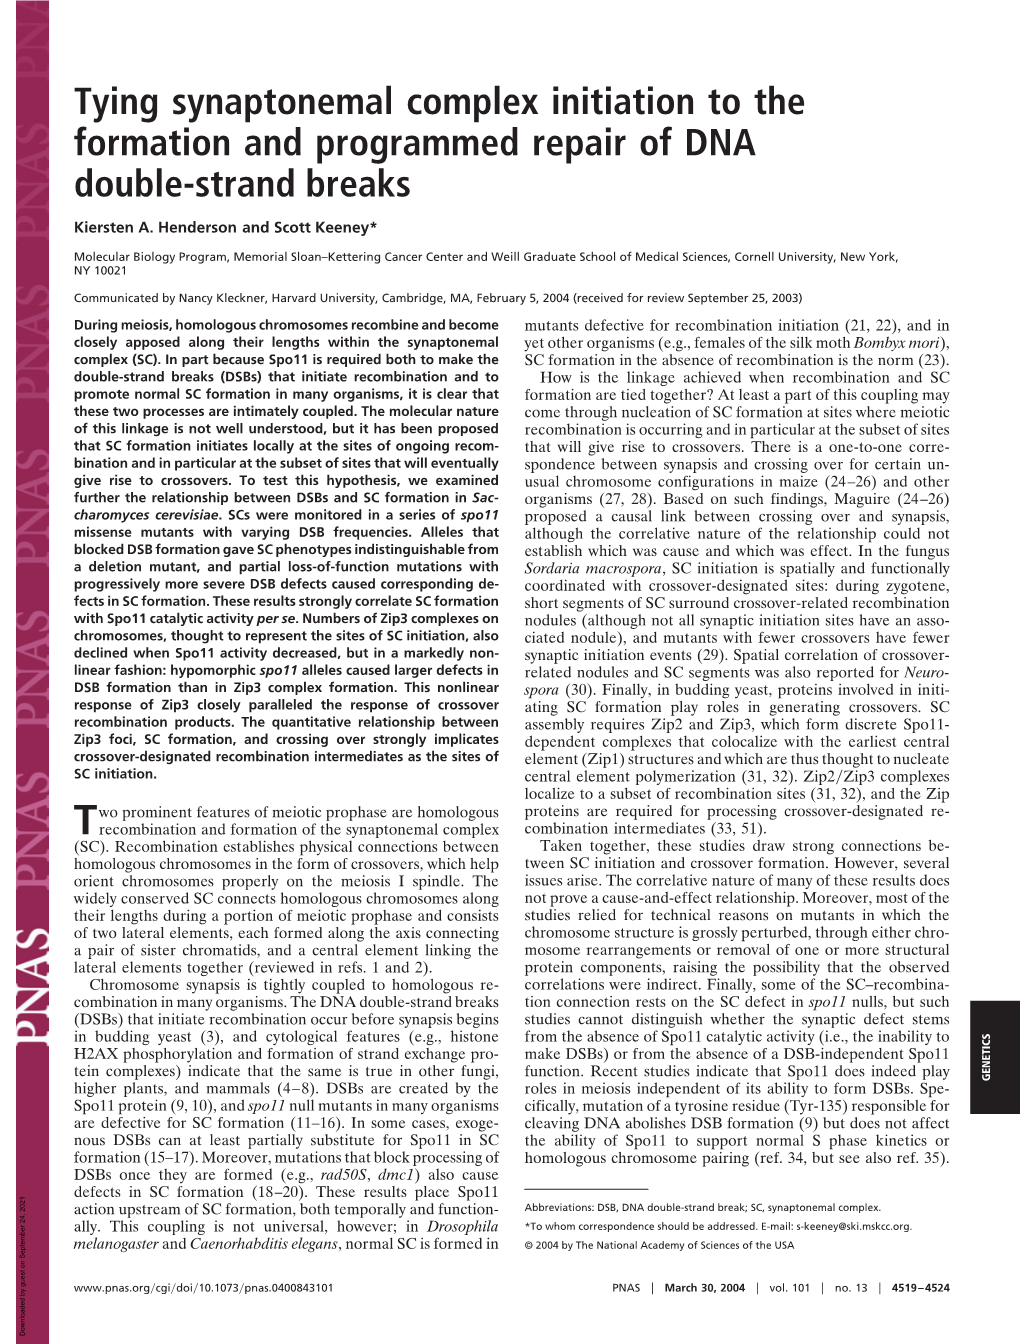 Tying Synaptonemal Complex Initiation to the Formation and Programmed Repair of DNA Double-Strand Breaks